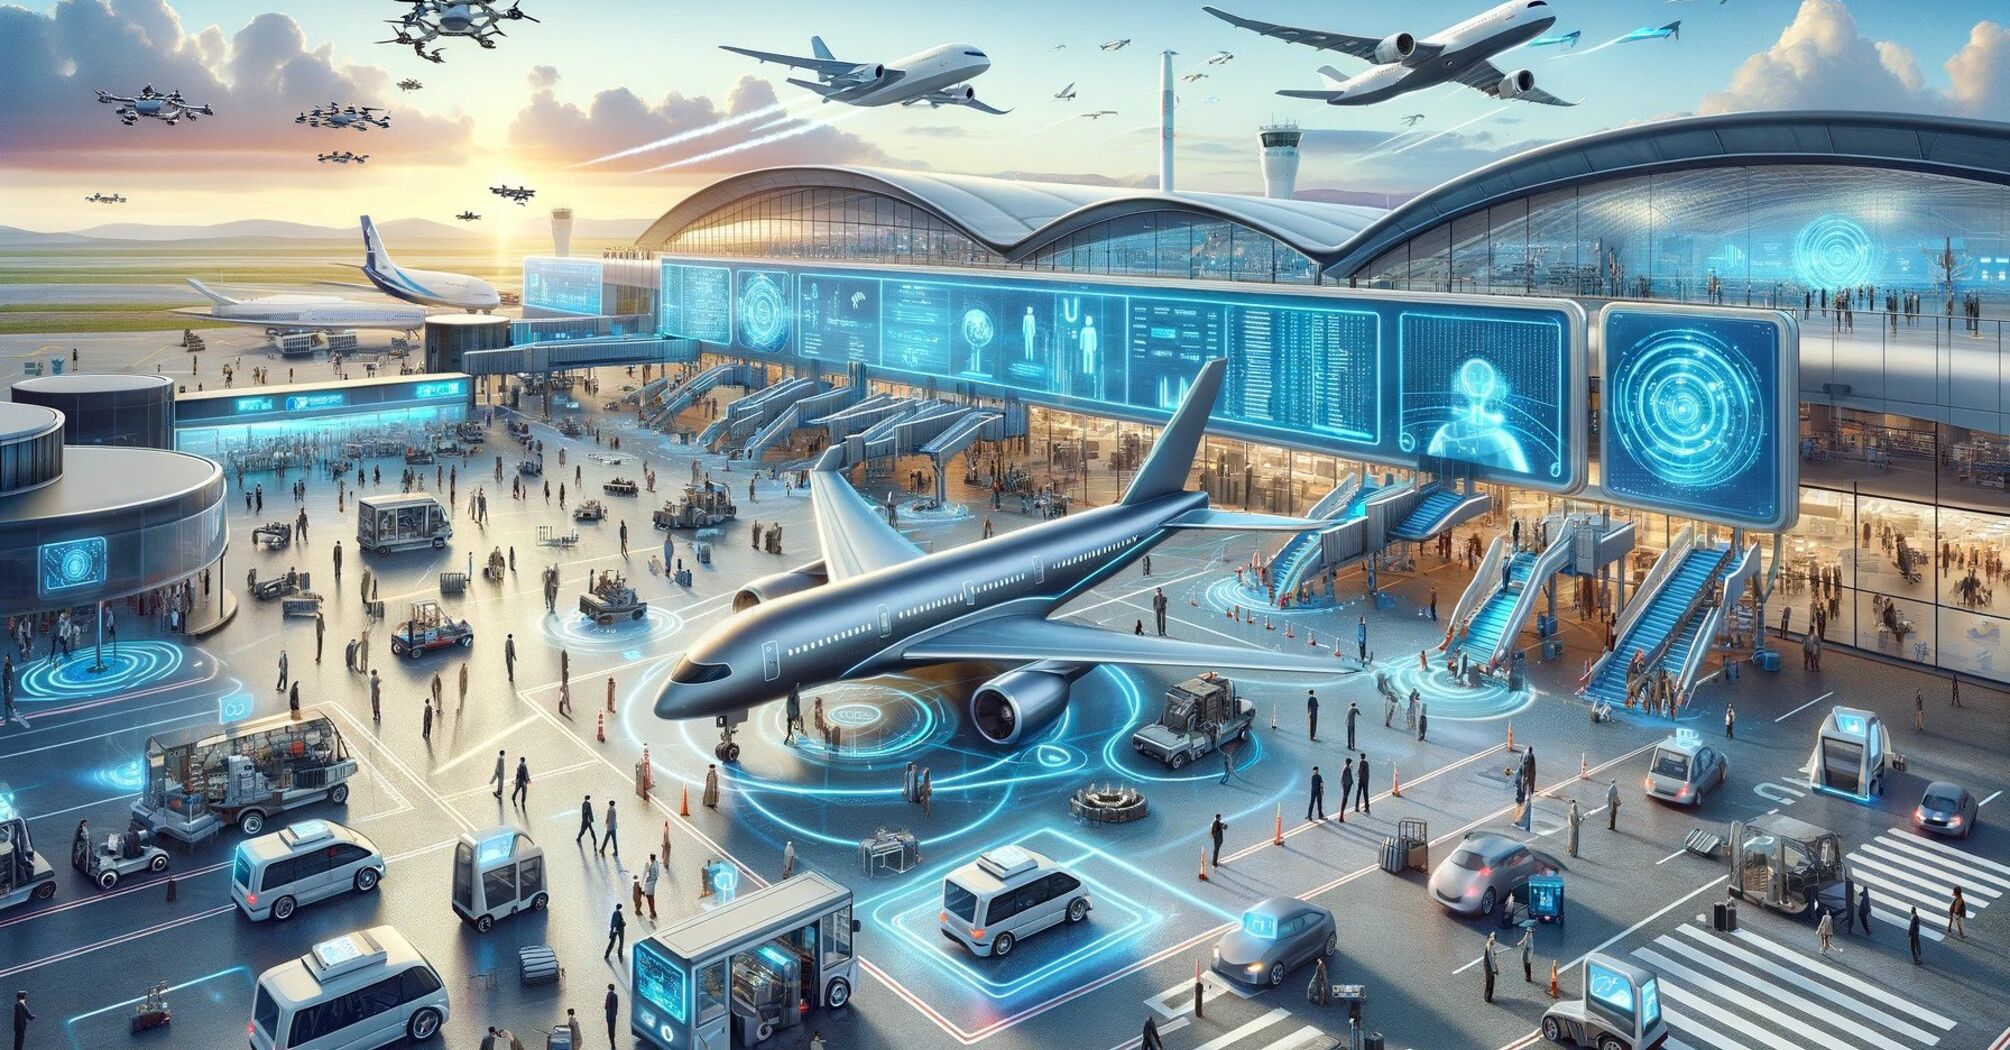 Futuristic airport scene showcasing AI's integration in aviation, with advanced aircraft, autonomous vehicles, and AI-driven passenger services 